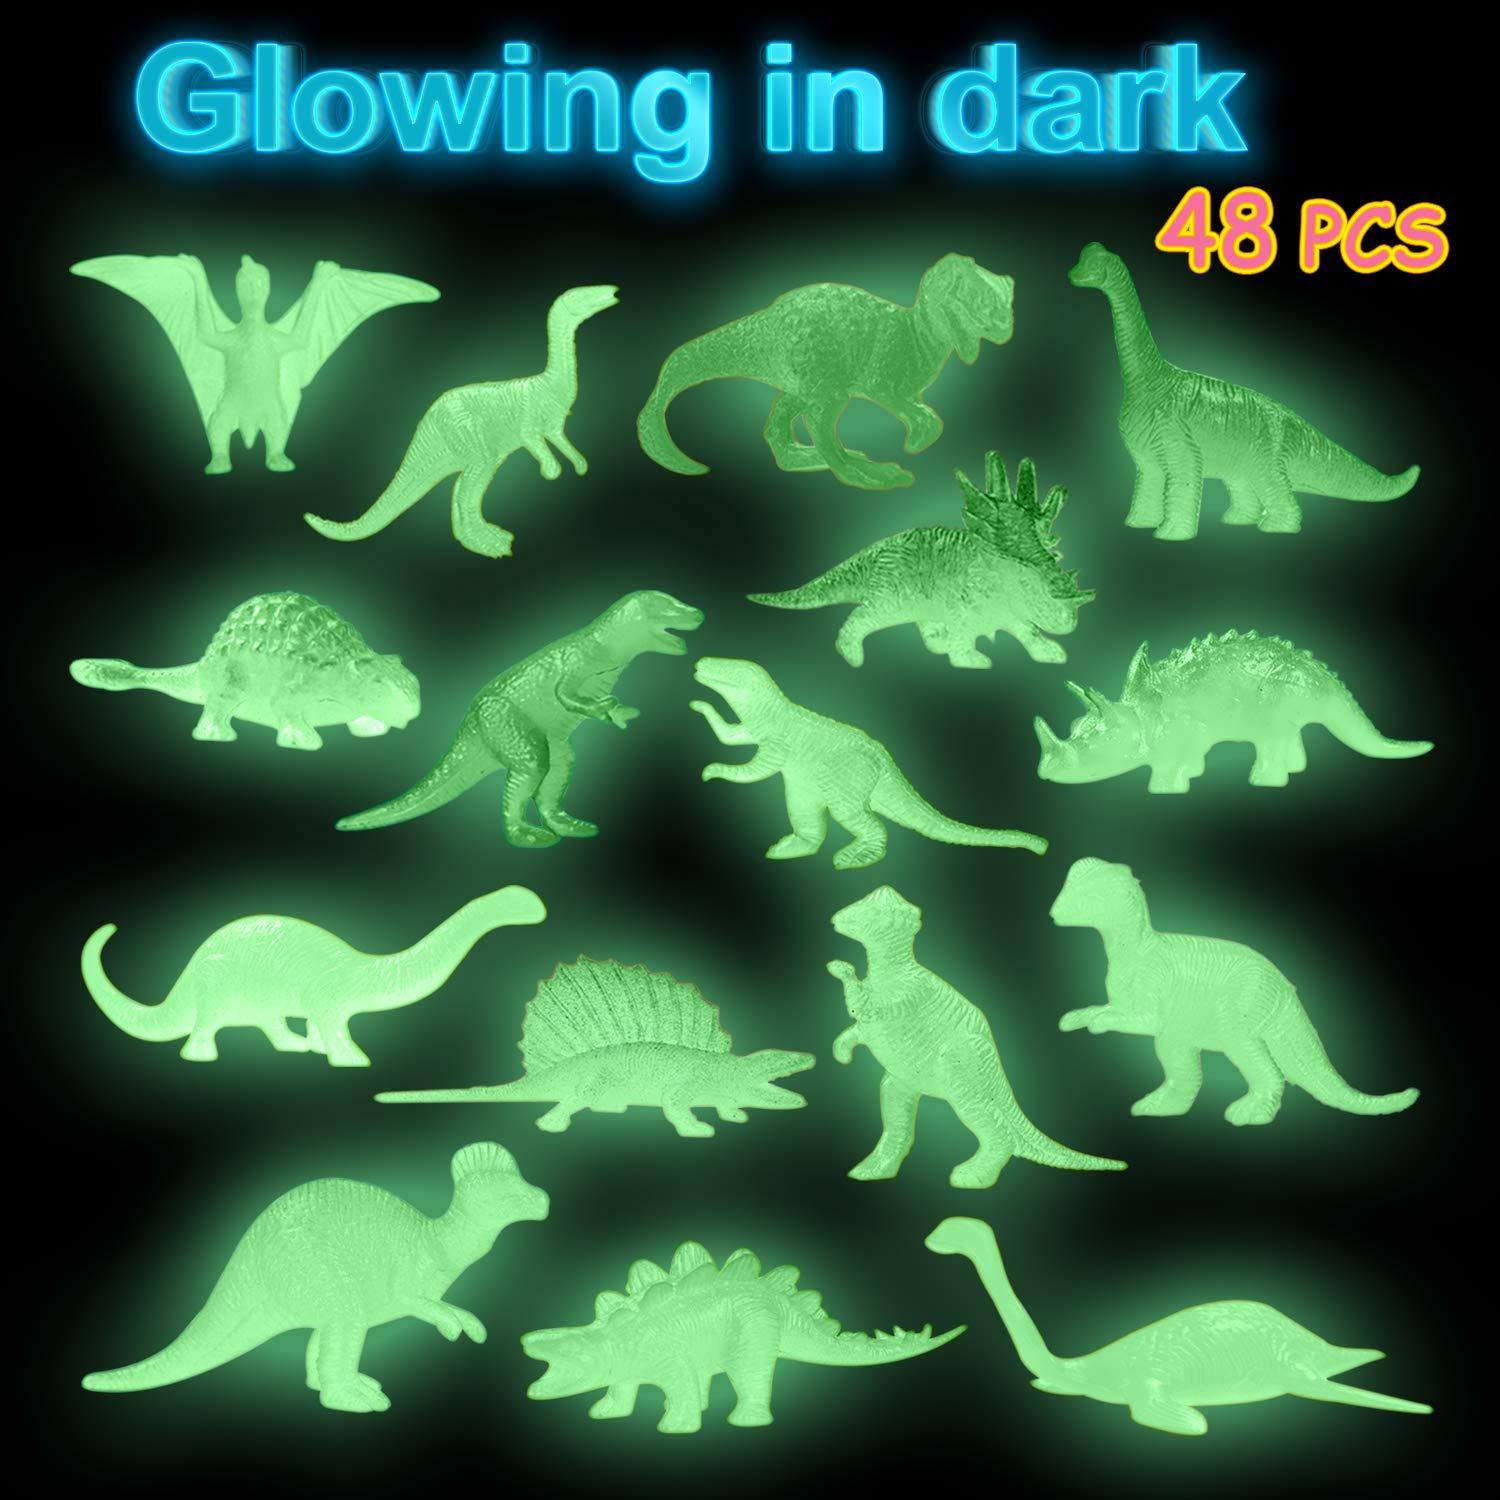 AugToy mini dinosaurs toys 48pcs glow in dark dino figure dinosaur party favors supplies birthday cup cake topper goodie bag bulk cl